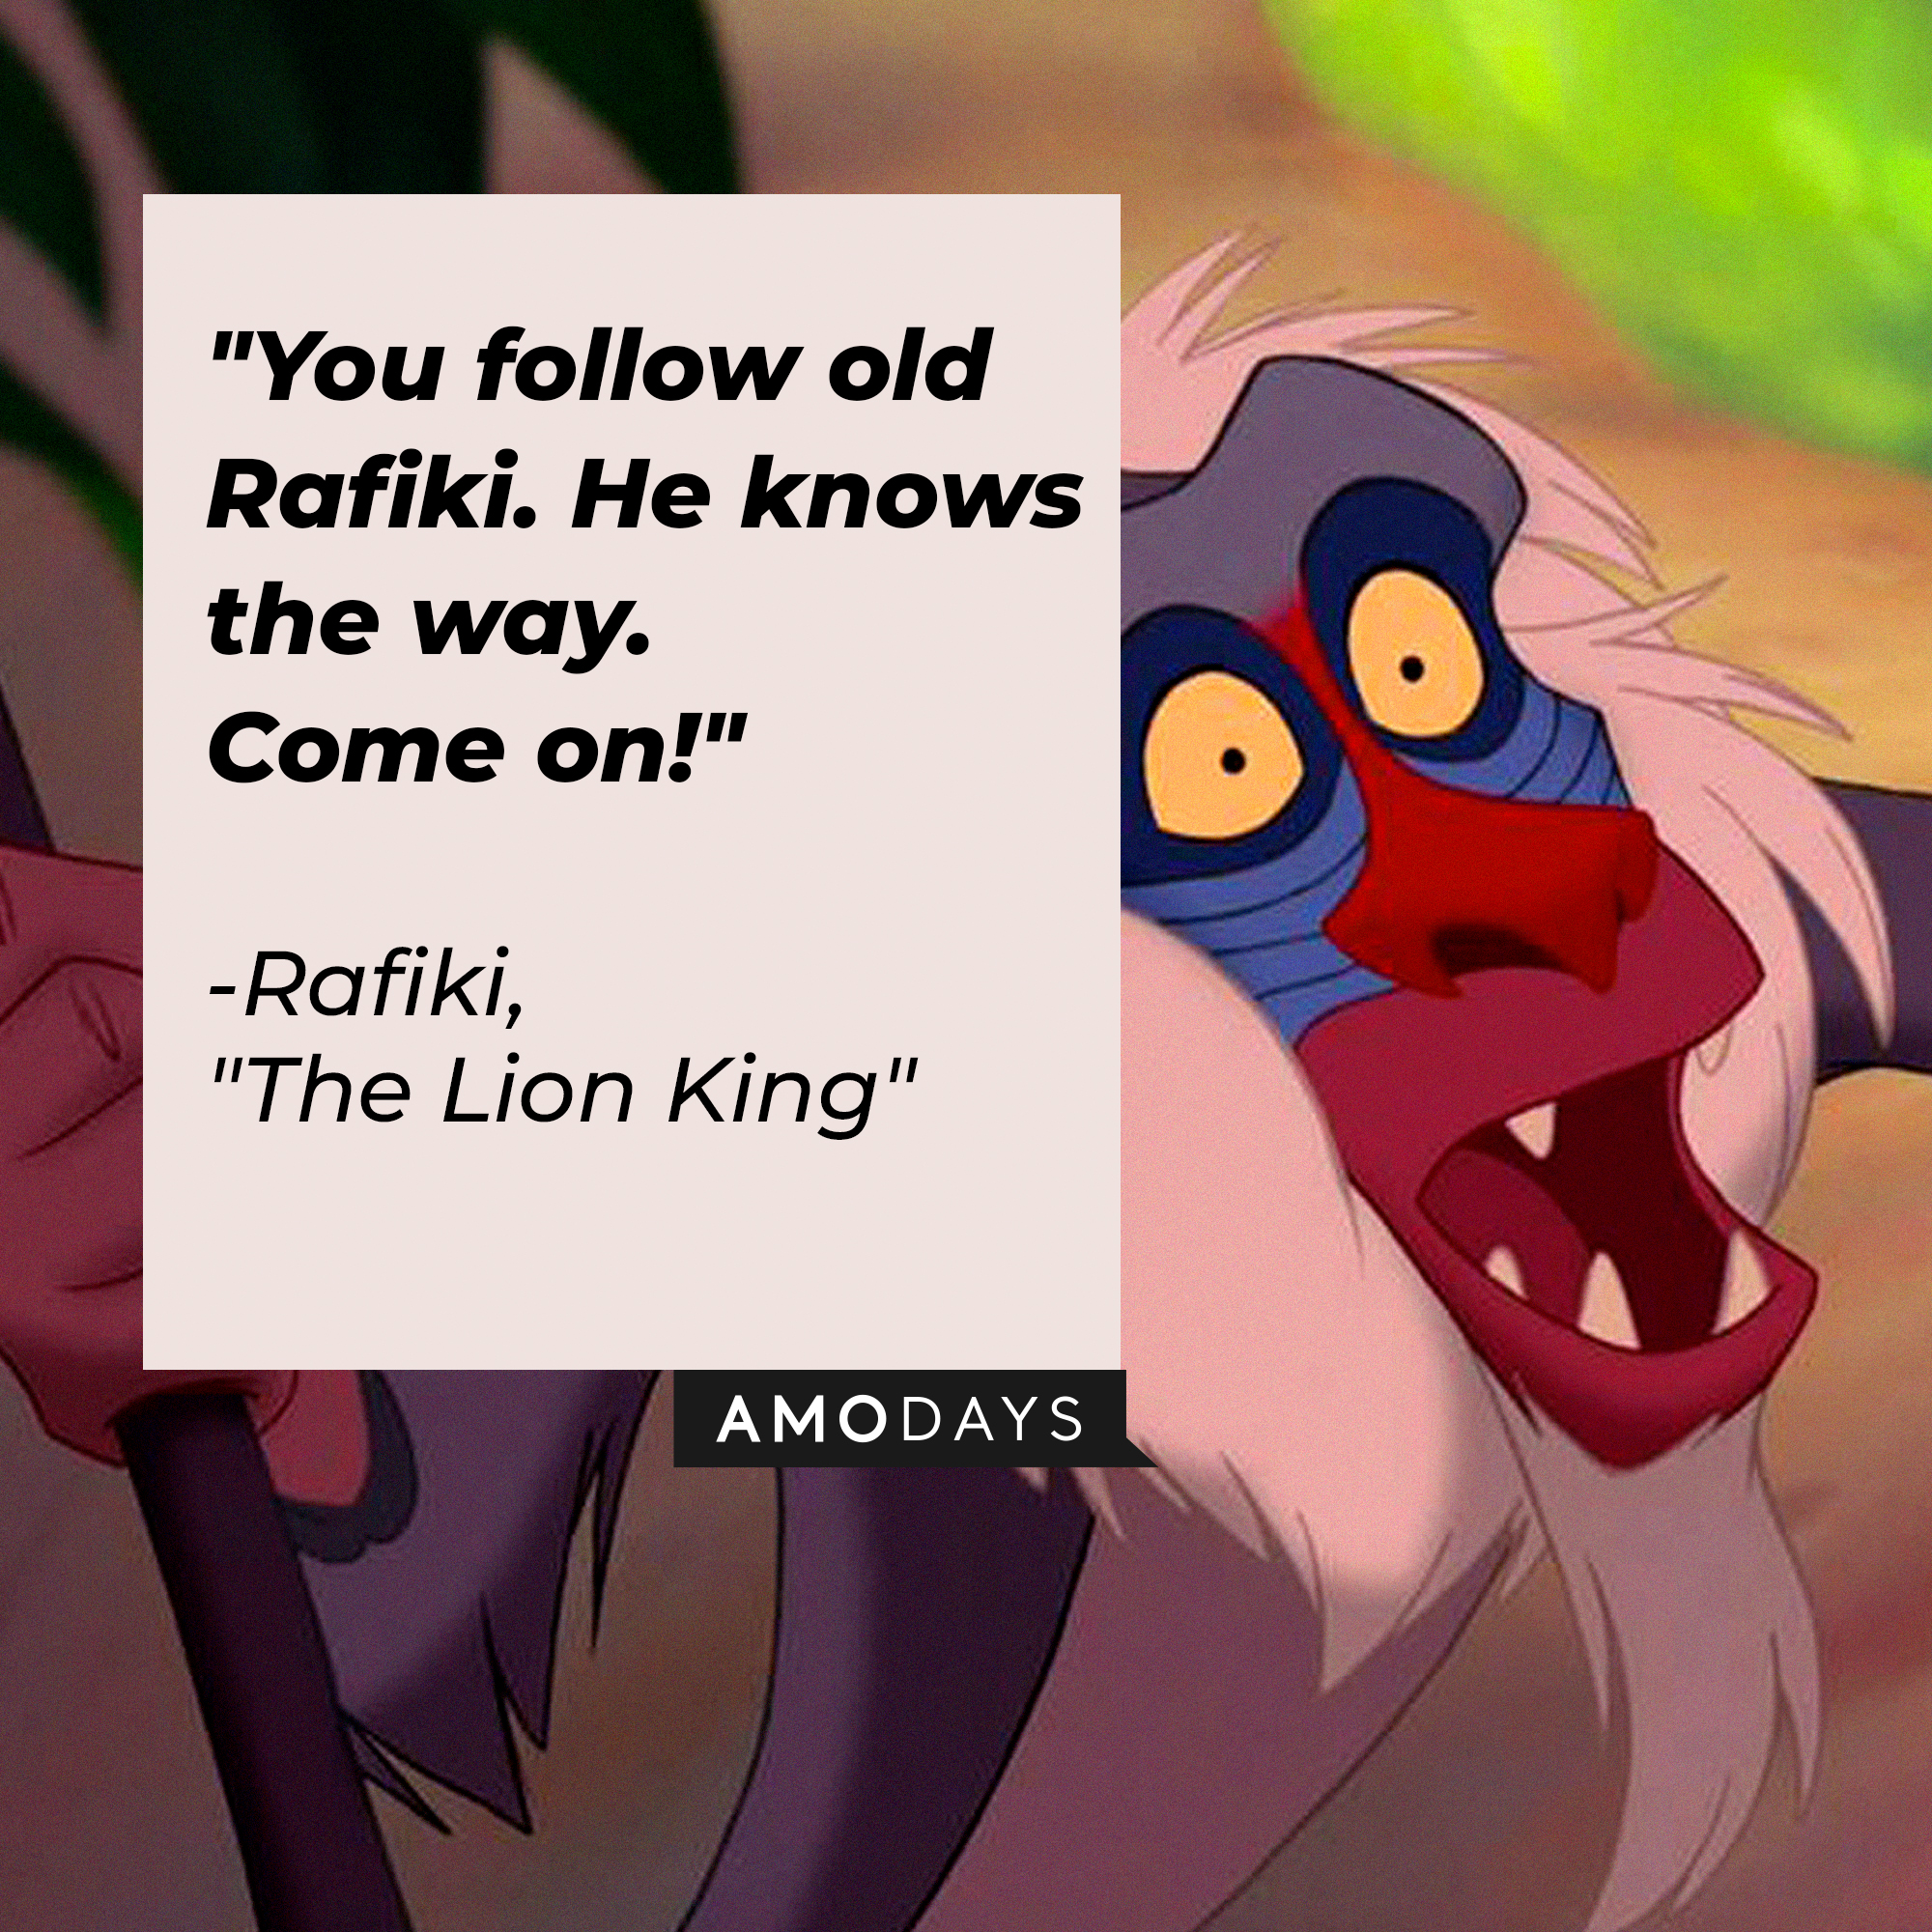 Rafiki with his quote: "You follow old Rafiki. He knows the way. Come on!" | Source: Facebook.com/DisneyTheLionKing